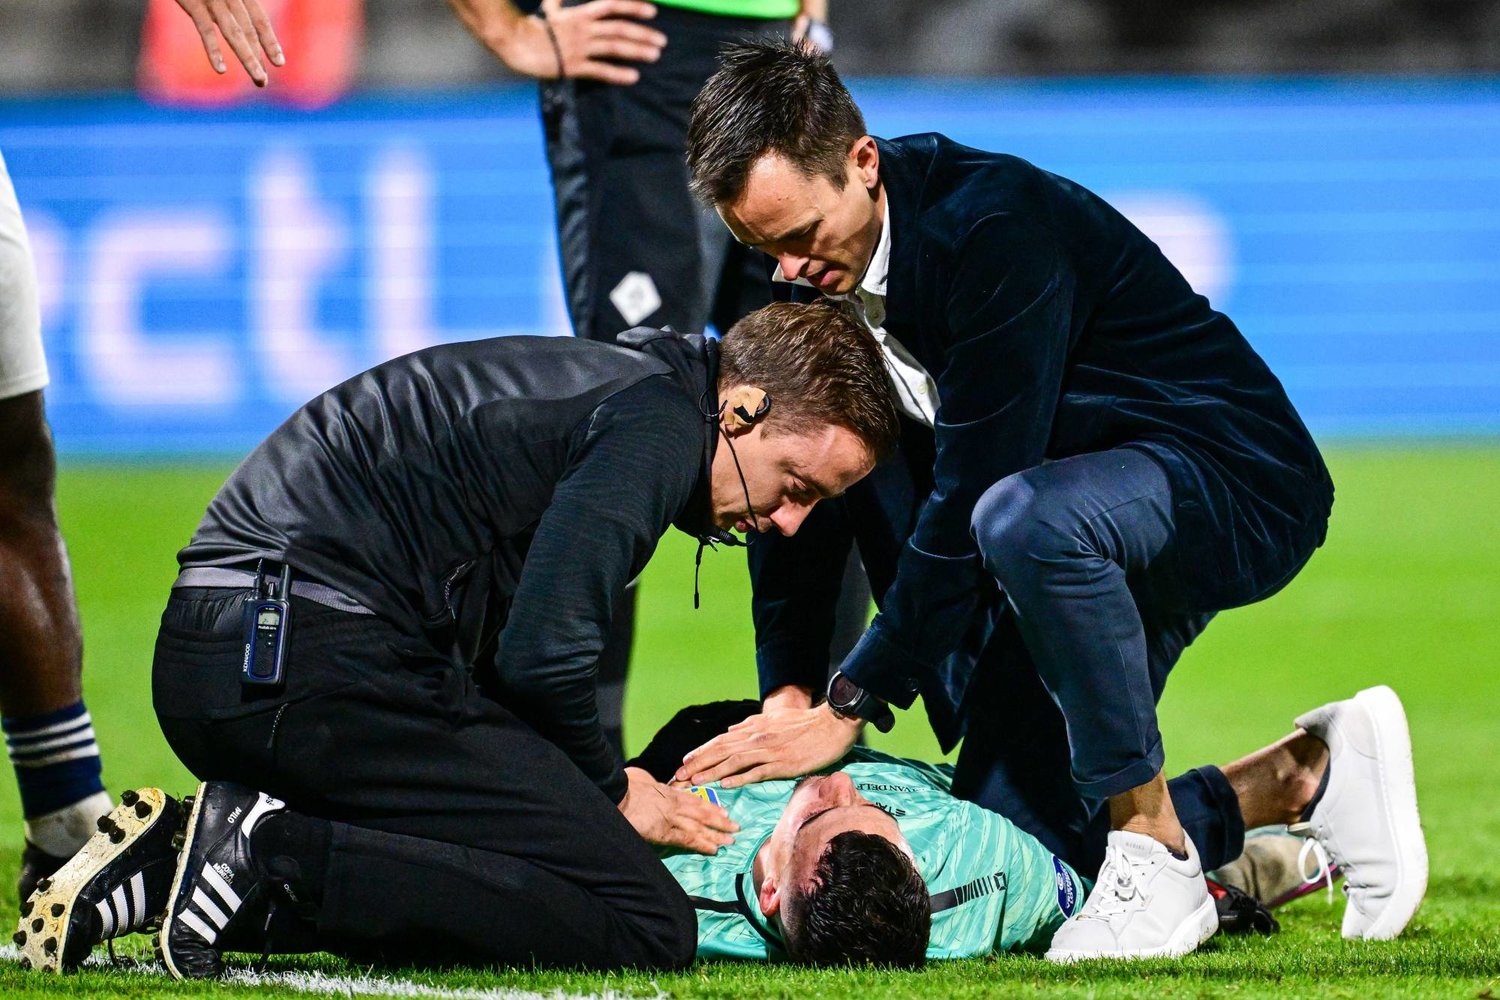 Ajax Waalwijk game was abandoned after the goalkeeper was knocked unconscious